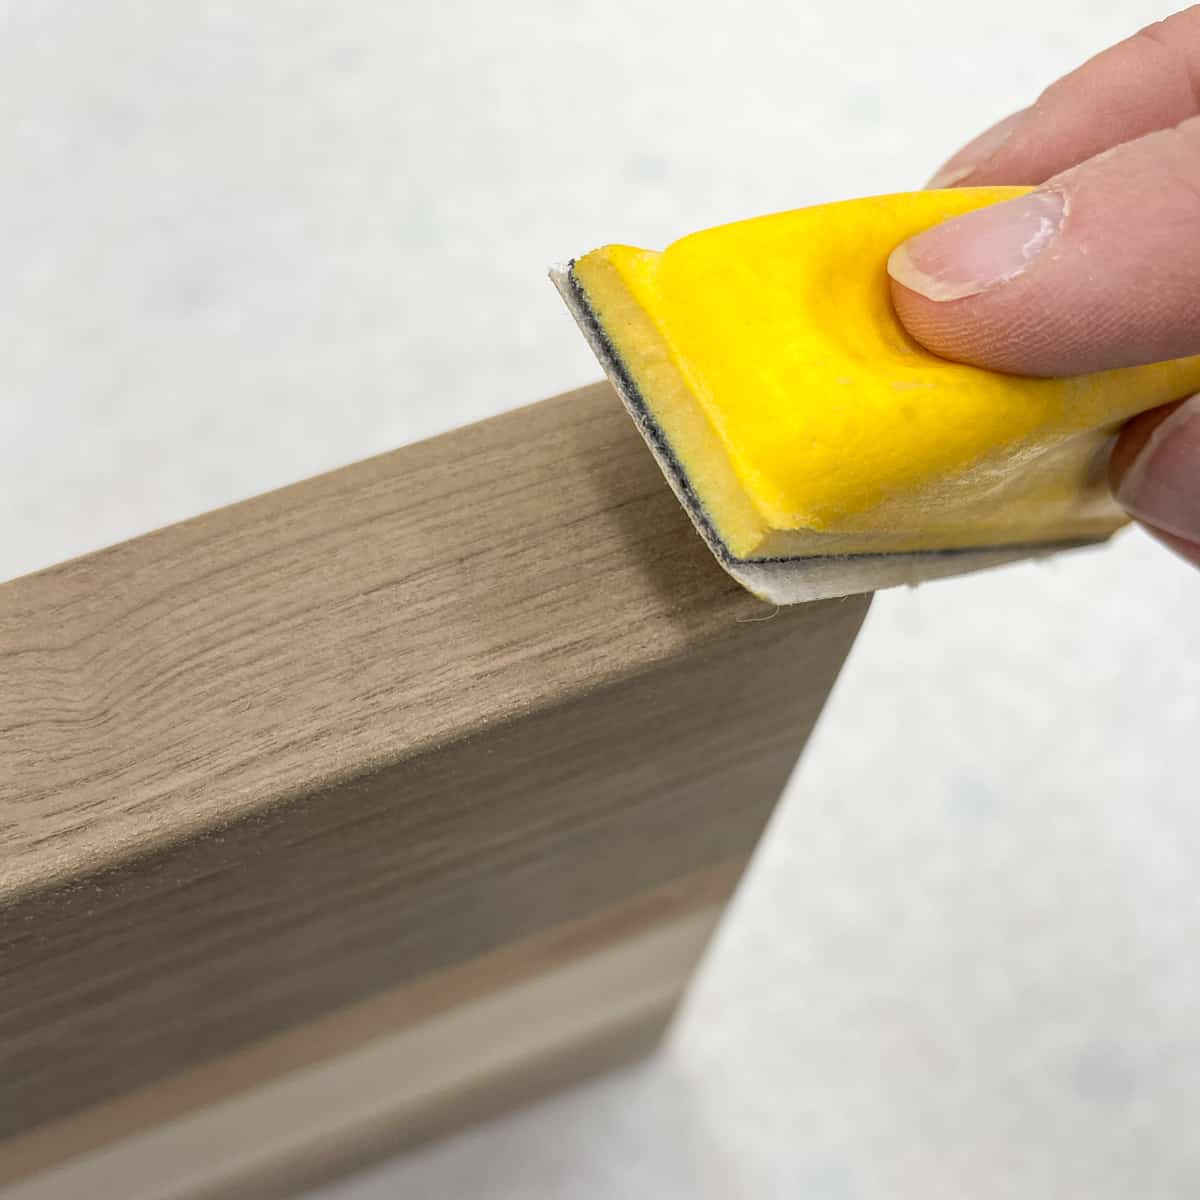 rounding over sharp corners of cutting board with a hand sanding block